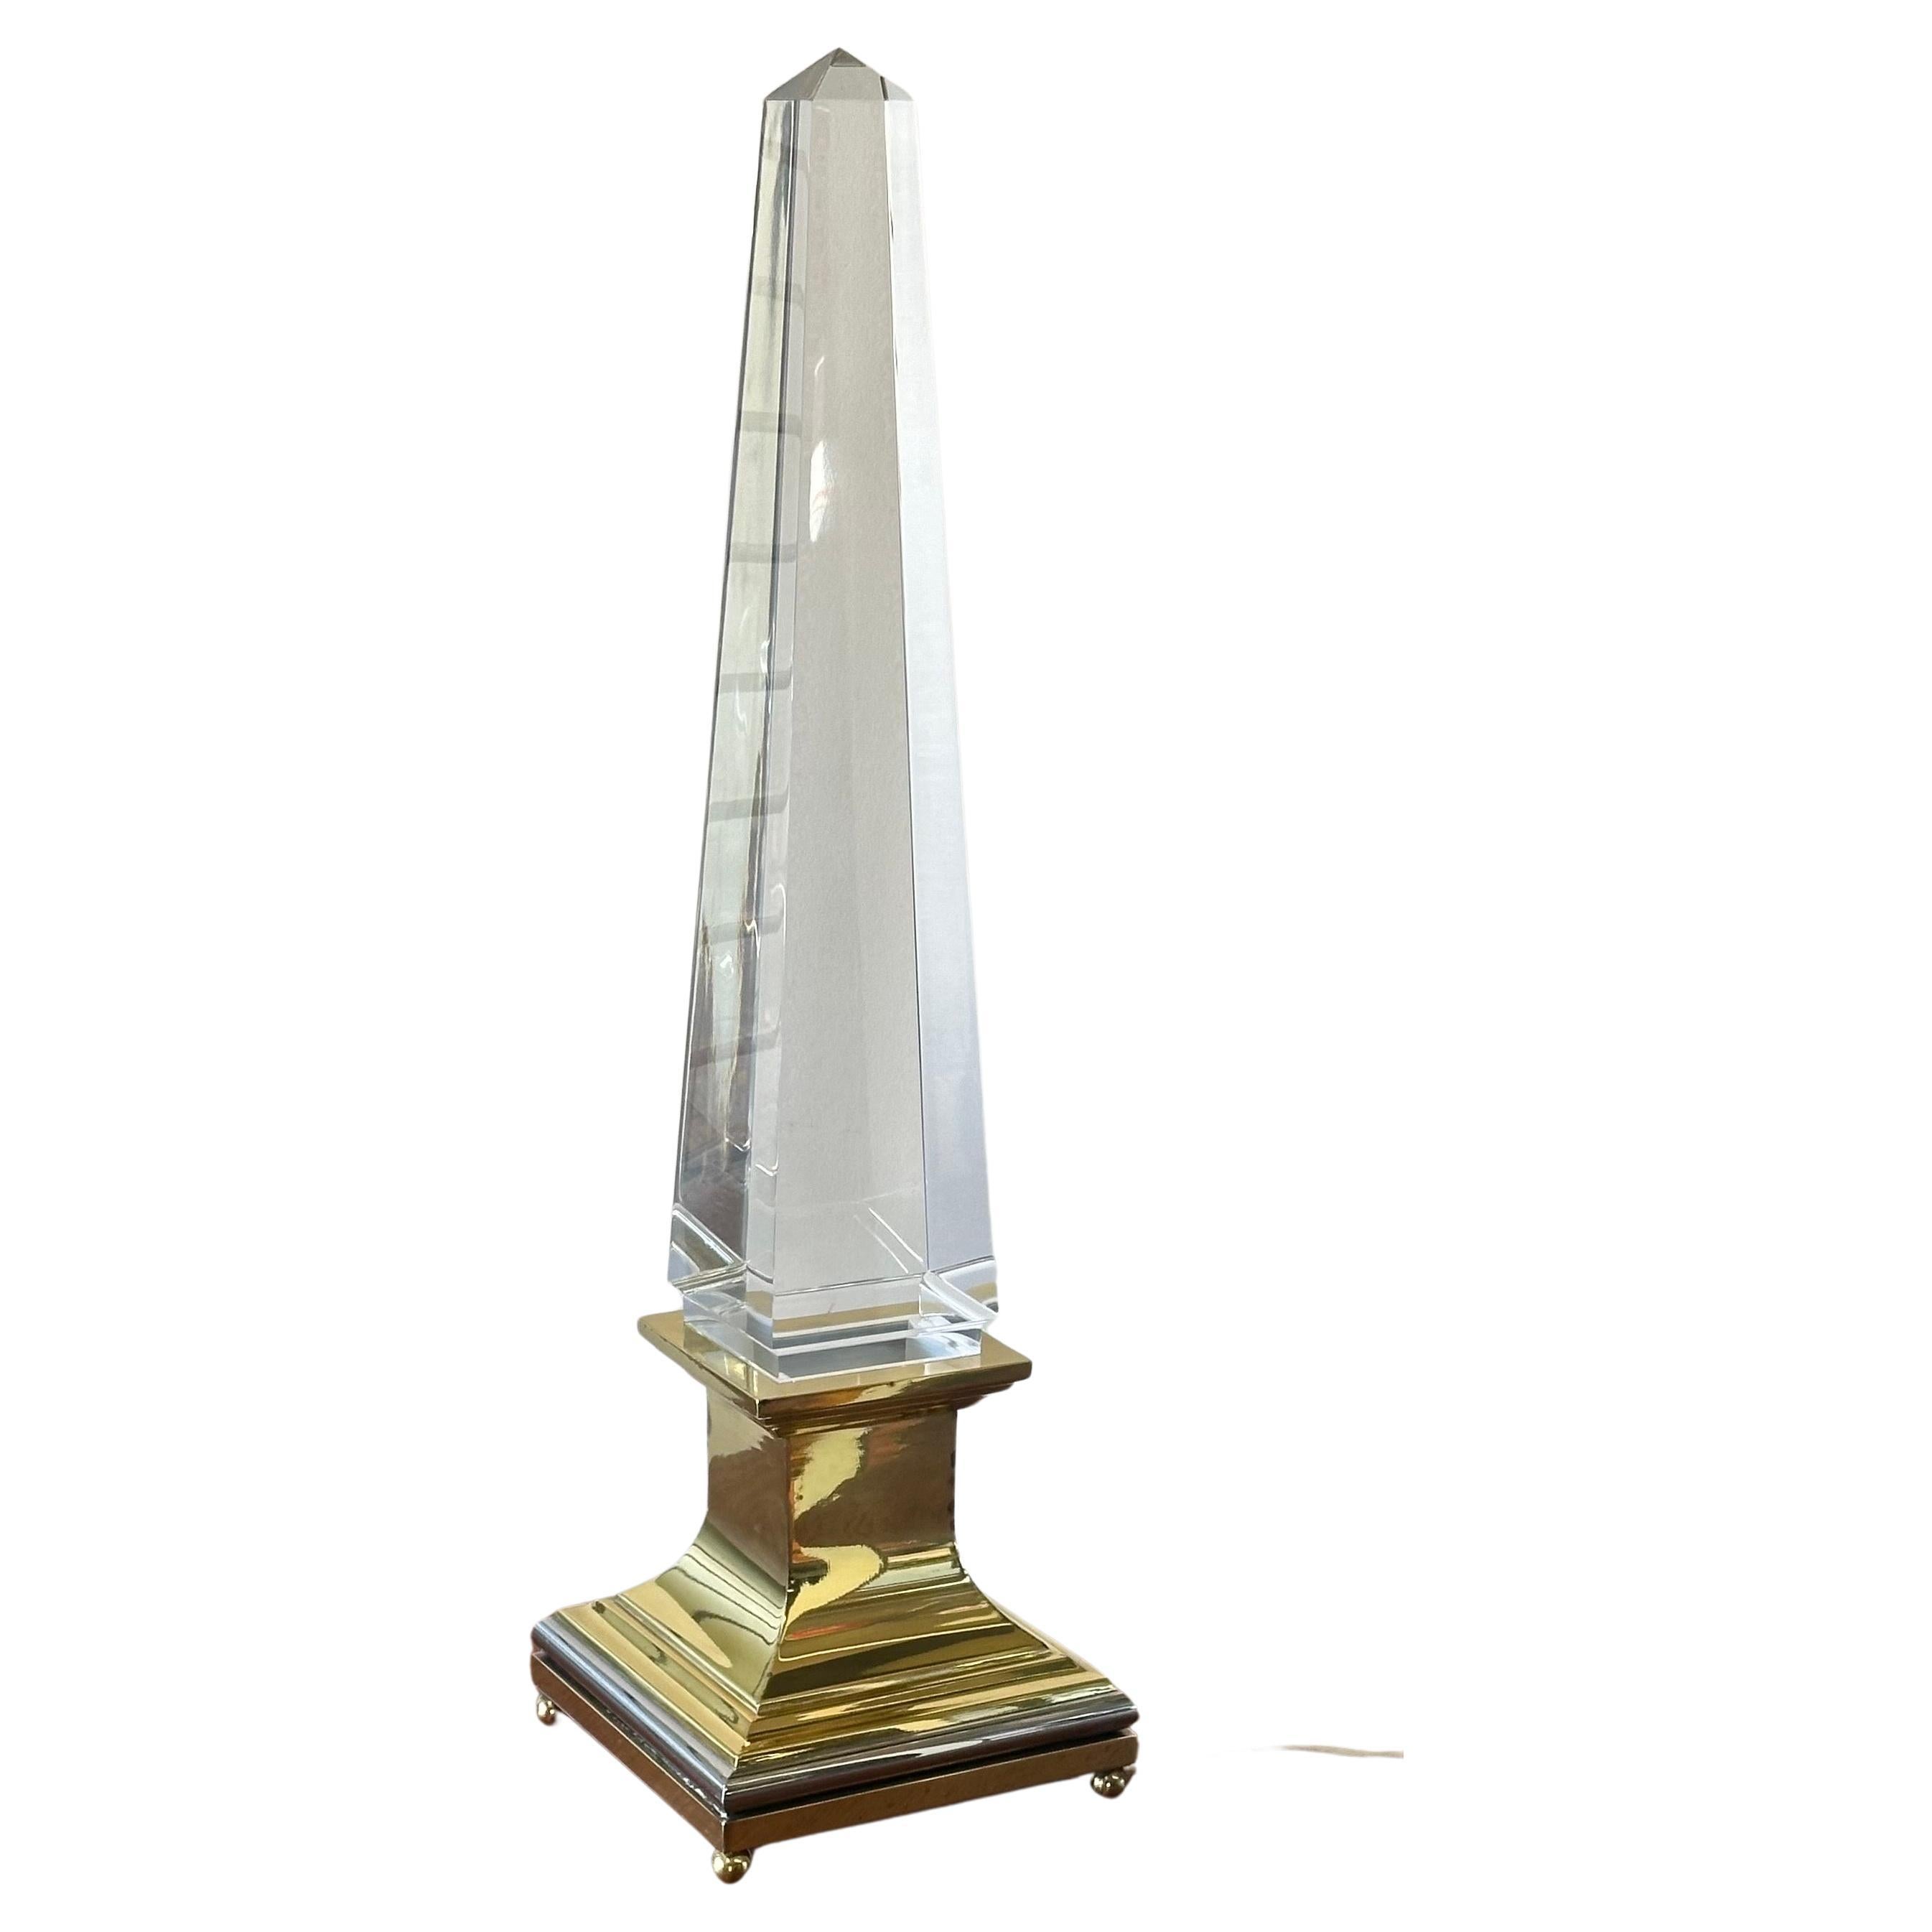 Pair of Lucite and Brass Obelisk Table Lamps by Sandro Petti for Maison Jansen In Good Condition For Sale In San Diego, CA